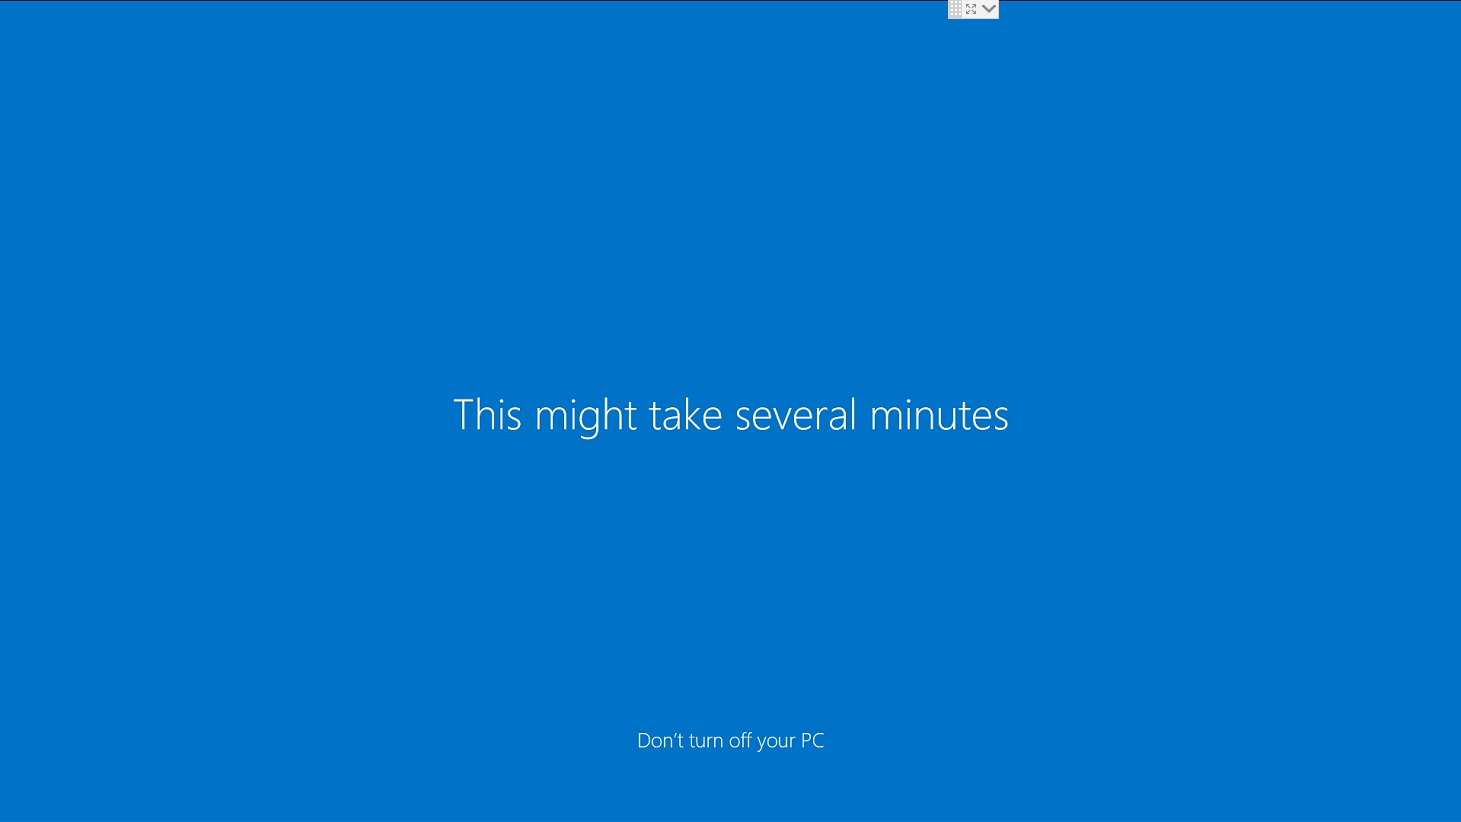 Windows 10 Updates Might Take Several Minutes